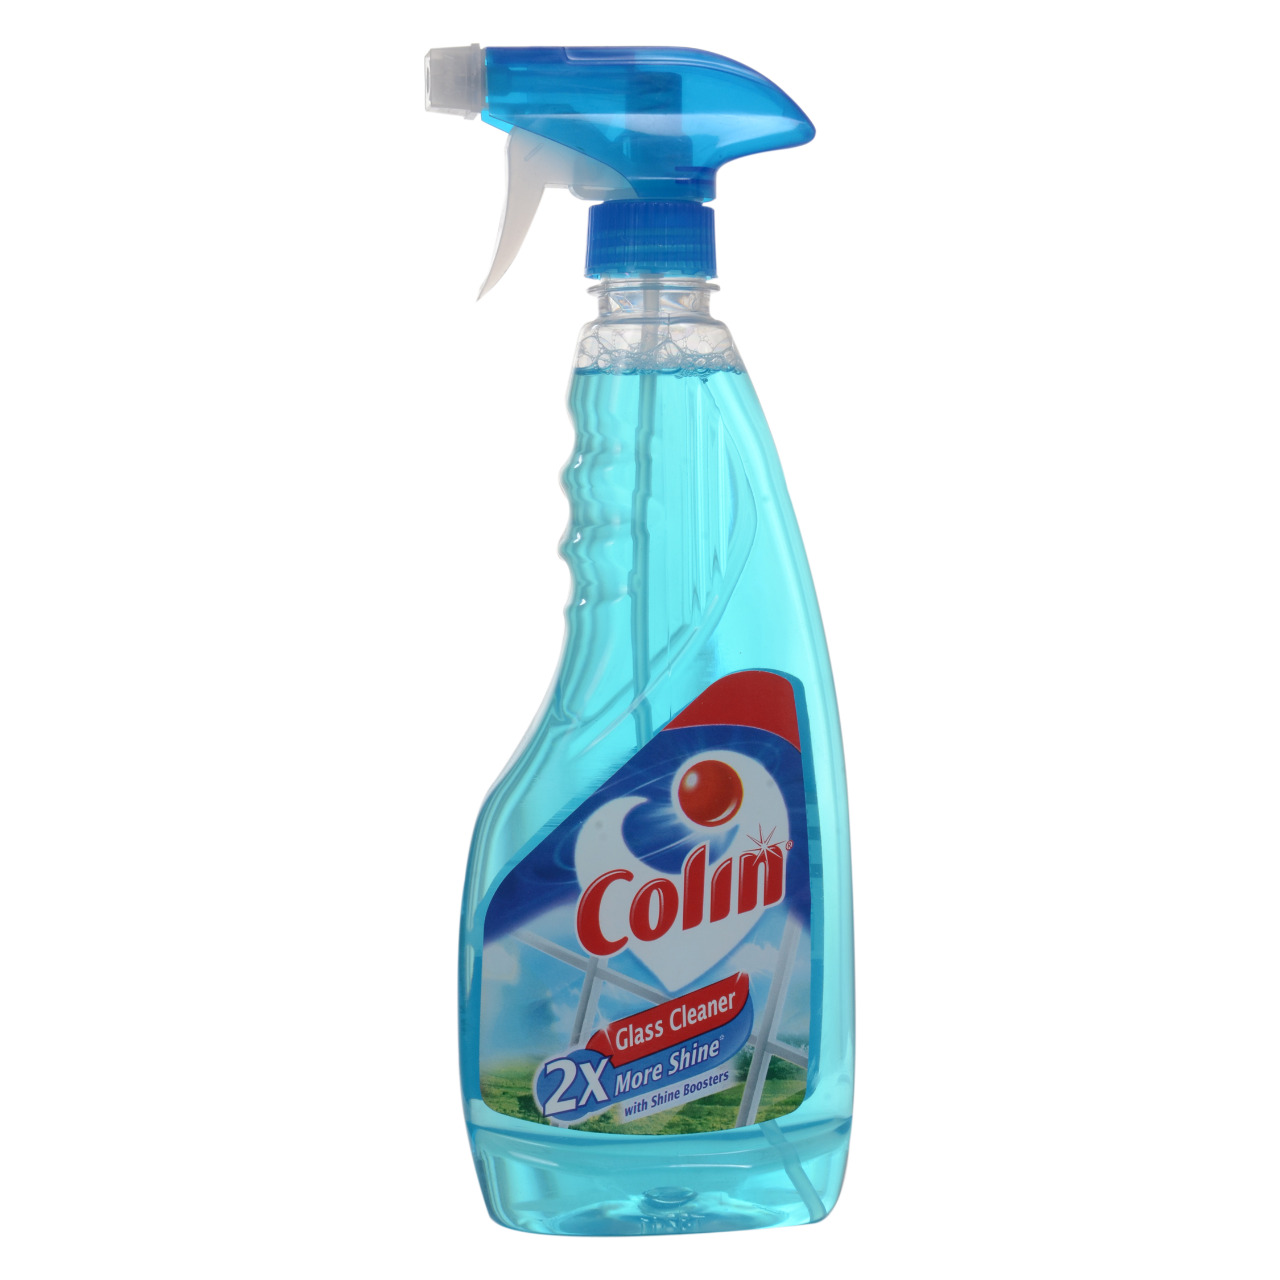 Colin 500ml - Glass Cleaner